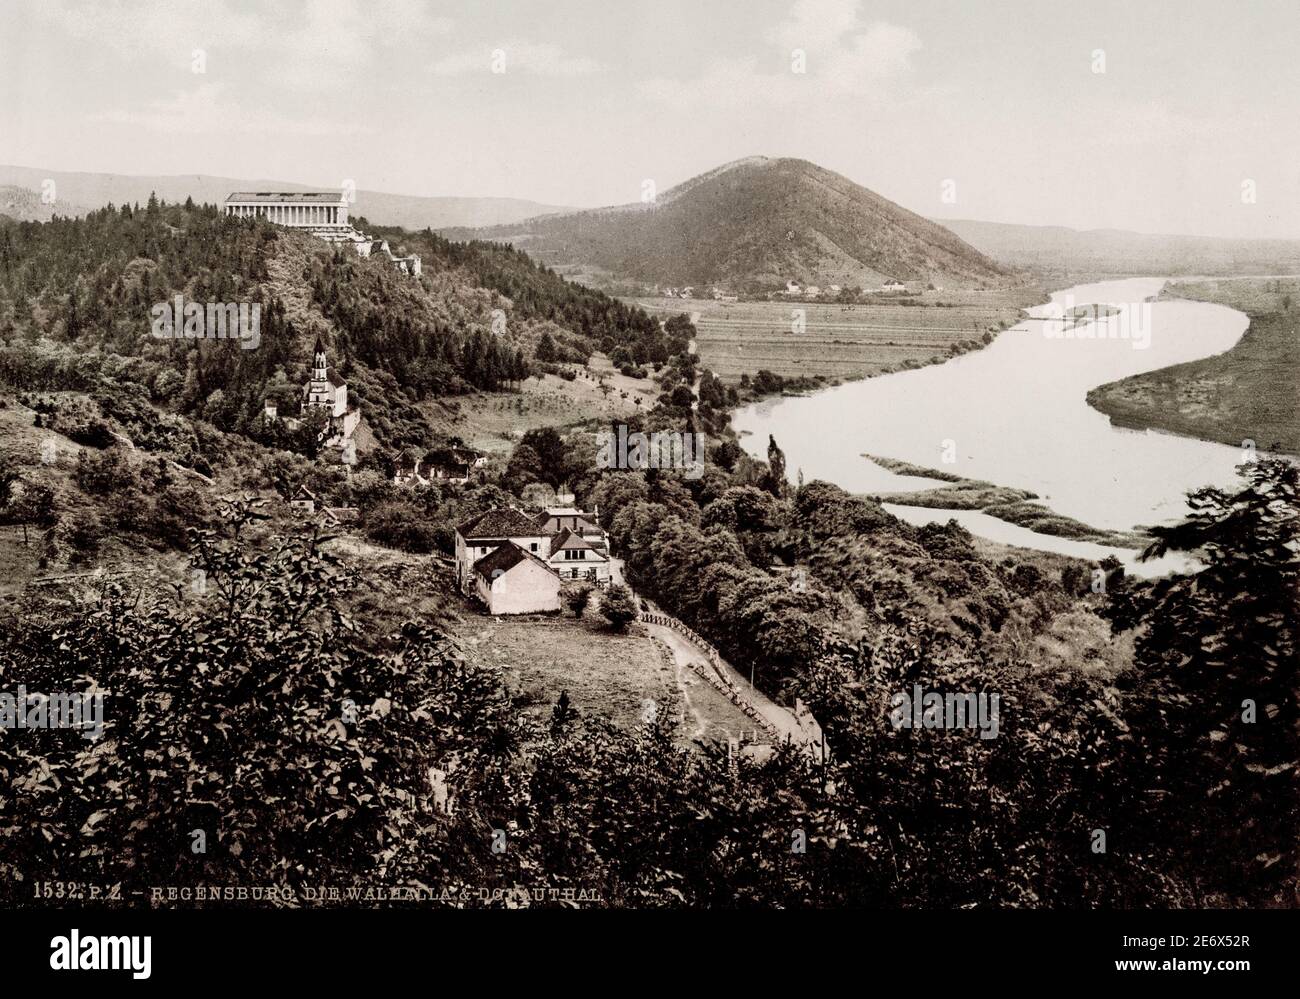 Vintage 19th century / 1900 photograph: Regensburg Germany, the Walhalla, and Donauthal. The Walhalla is a hall of fame that honours laudable and distinguished people in German history Stock Photo